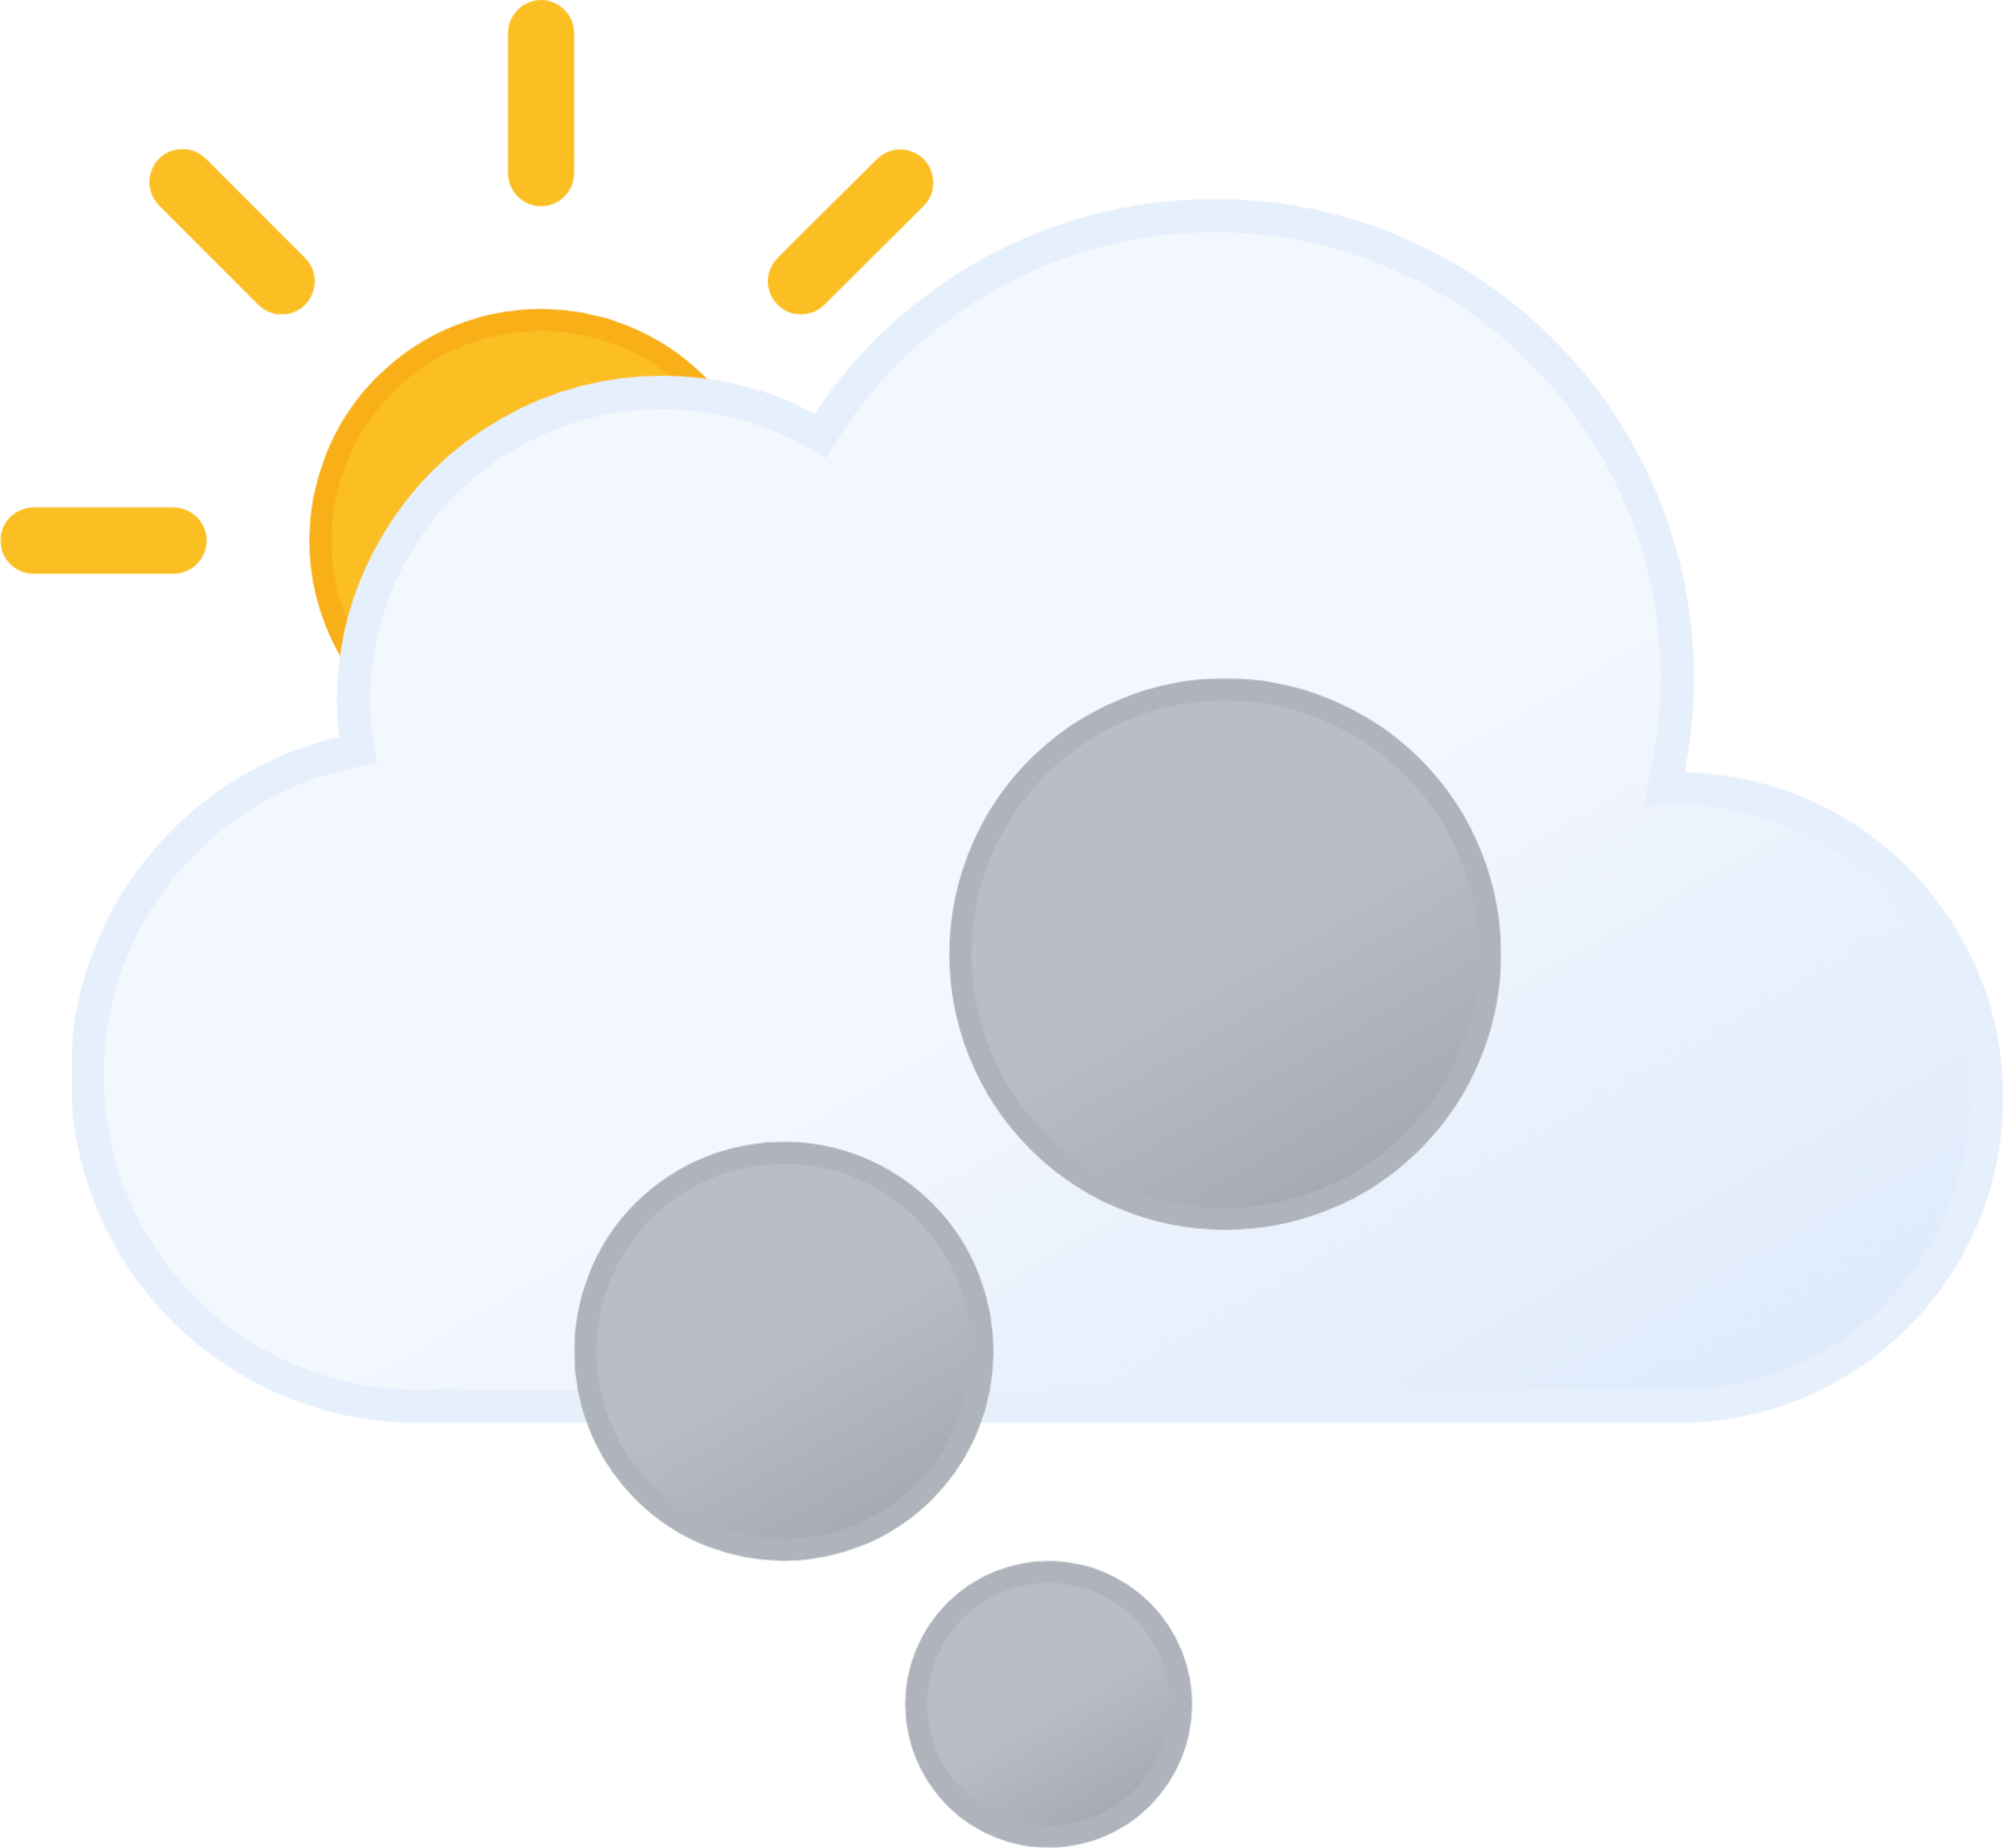 partly cloudy day smoke icon